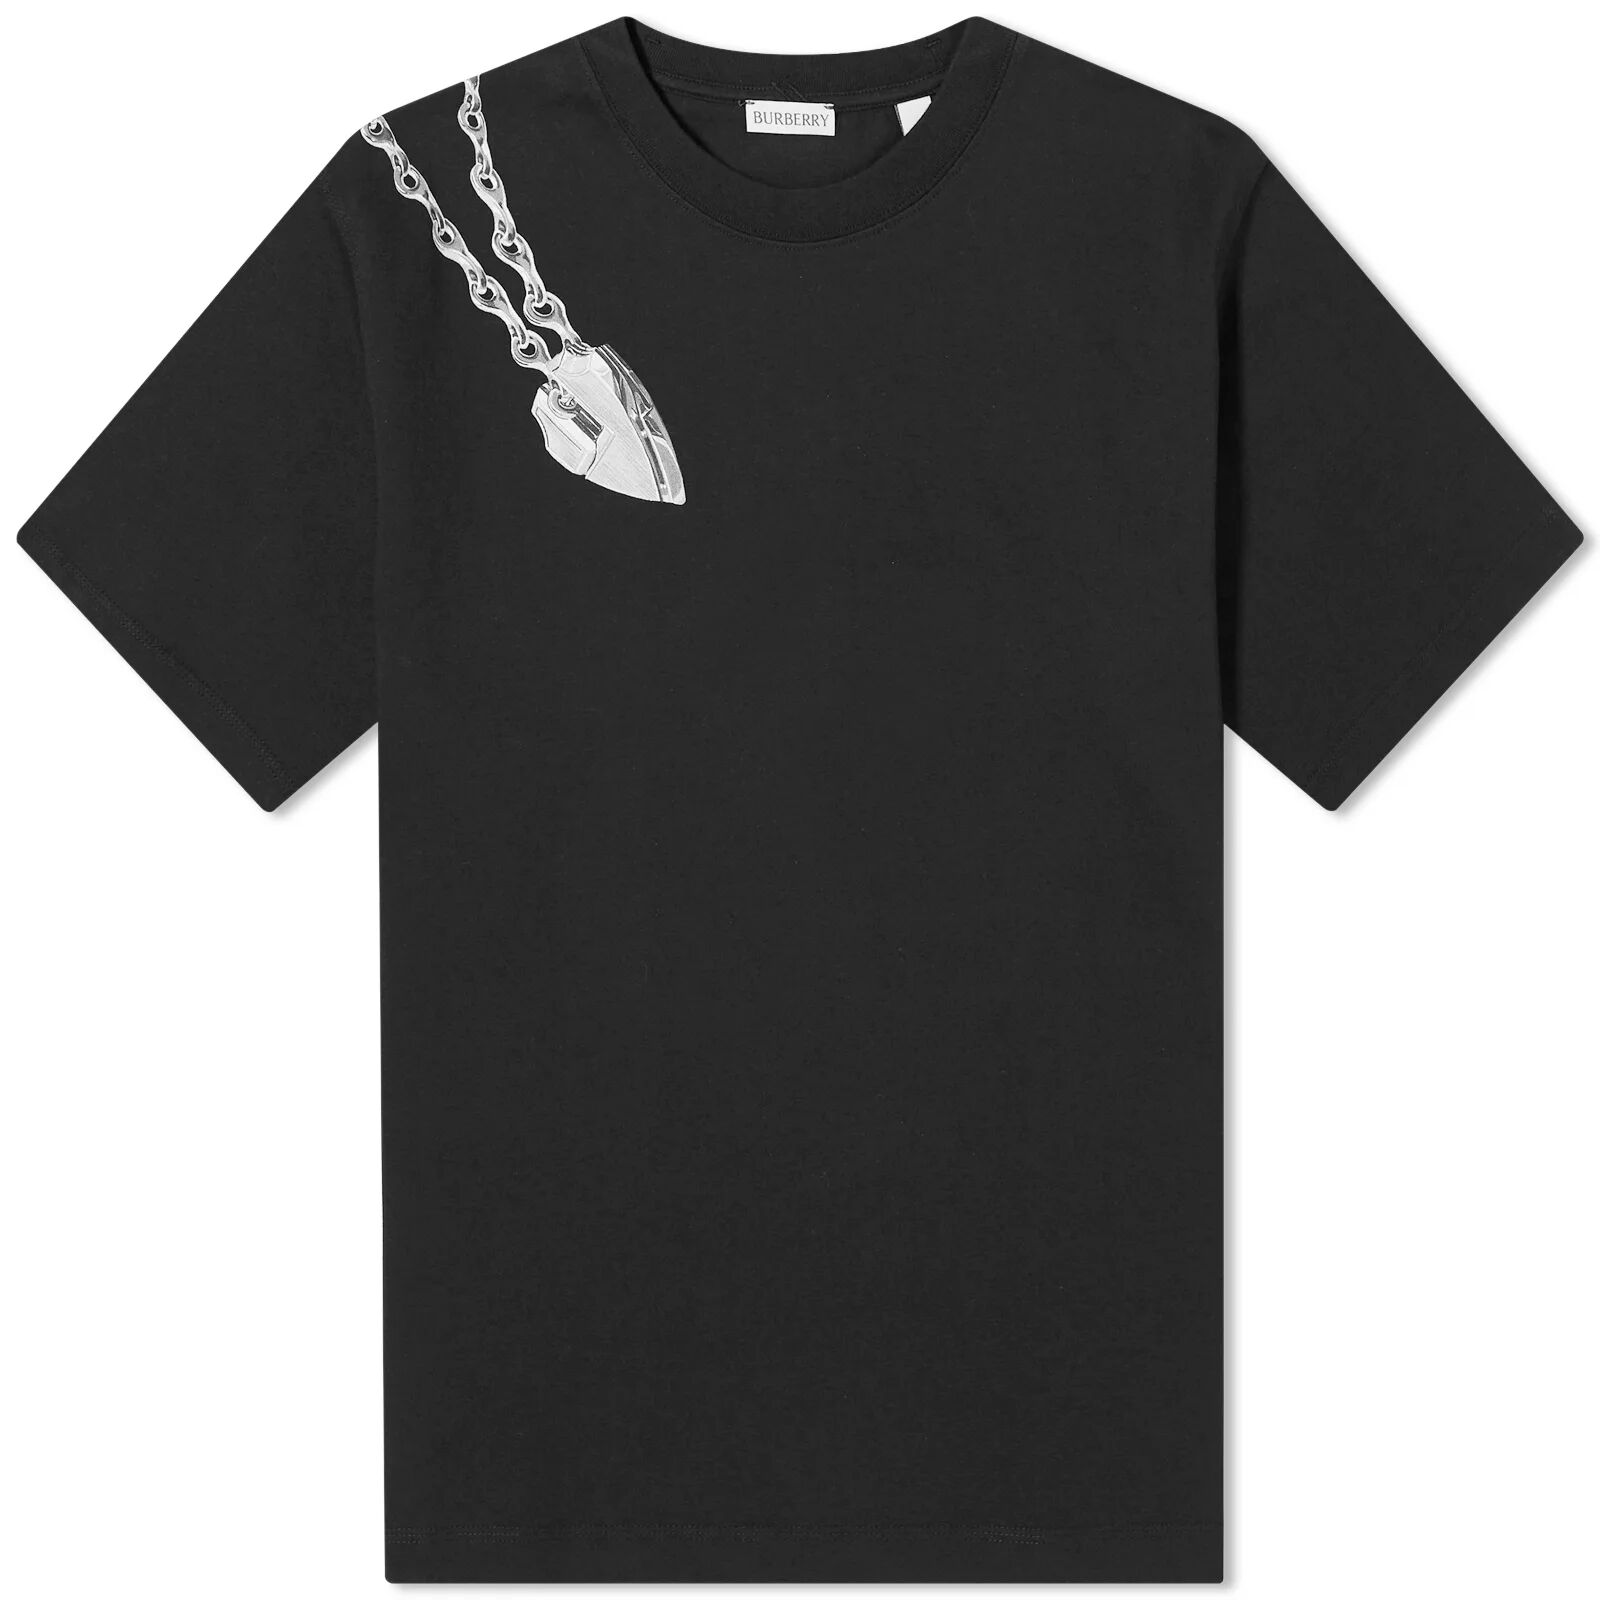 Burberry Men's Chain Print T-Shirt in Black, Size X-Large